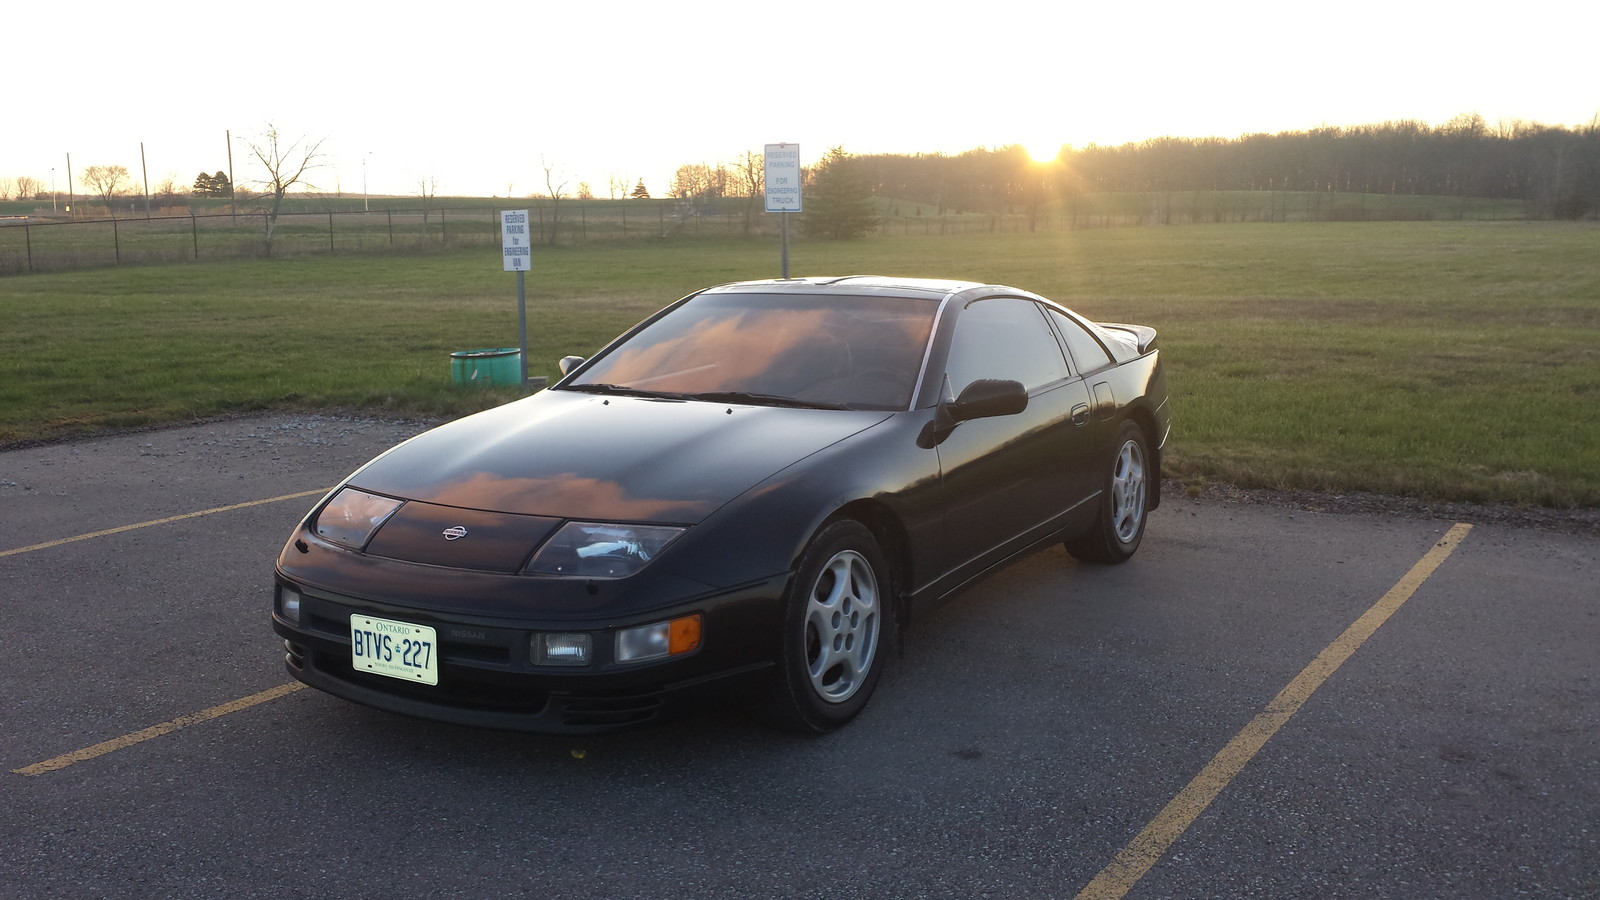 Nissan 300zx 1/4 mile times #3